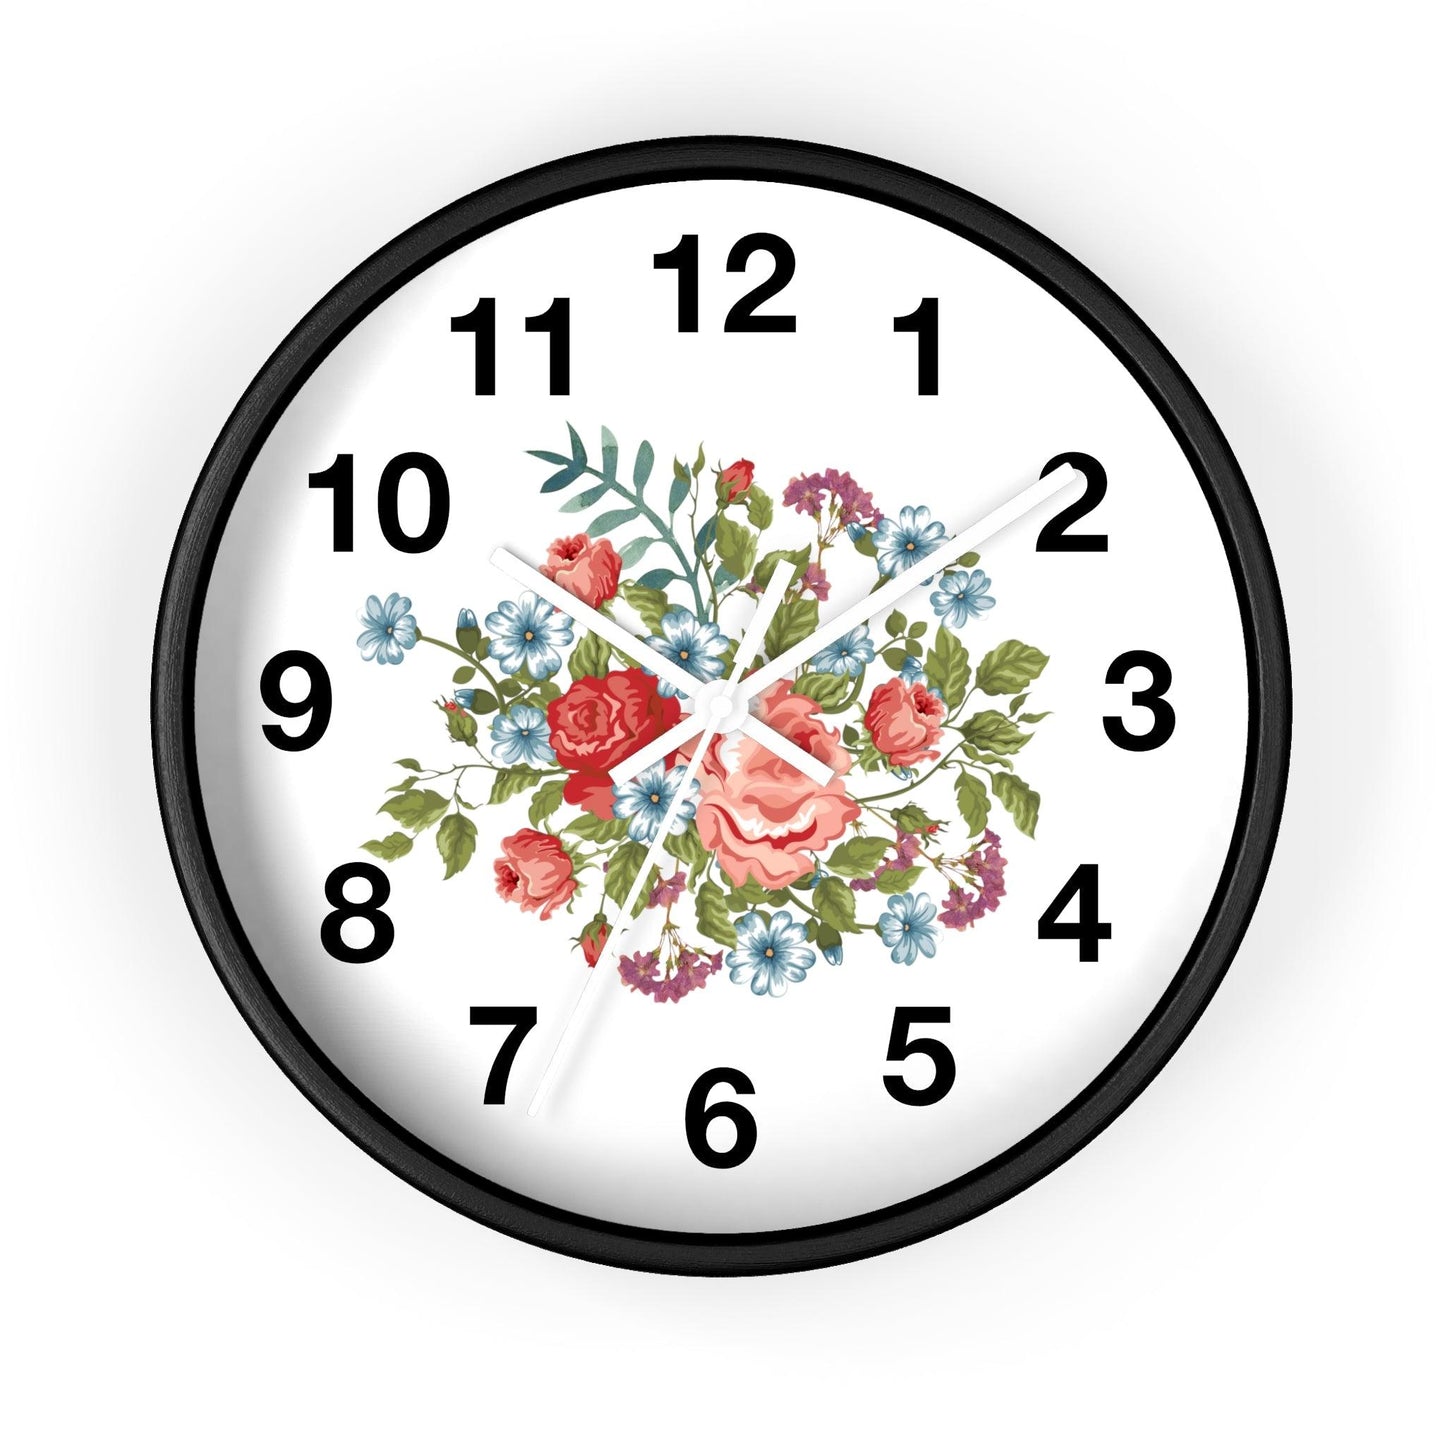 Flower Wall Clock Floral Wall Clock Home Decor Gift House Warming Gift- New Home Gift Mom Gift Farmhouse Clocks For Wall Living Room Bedroom